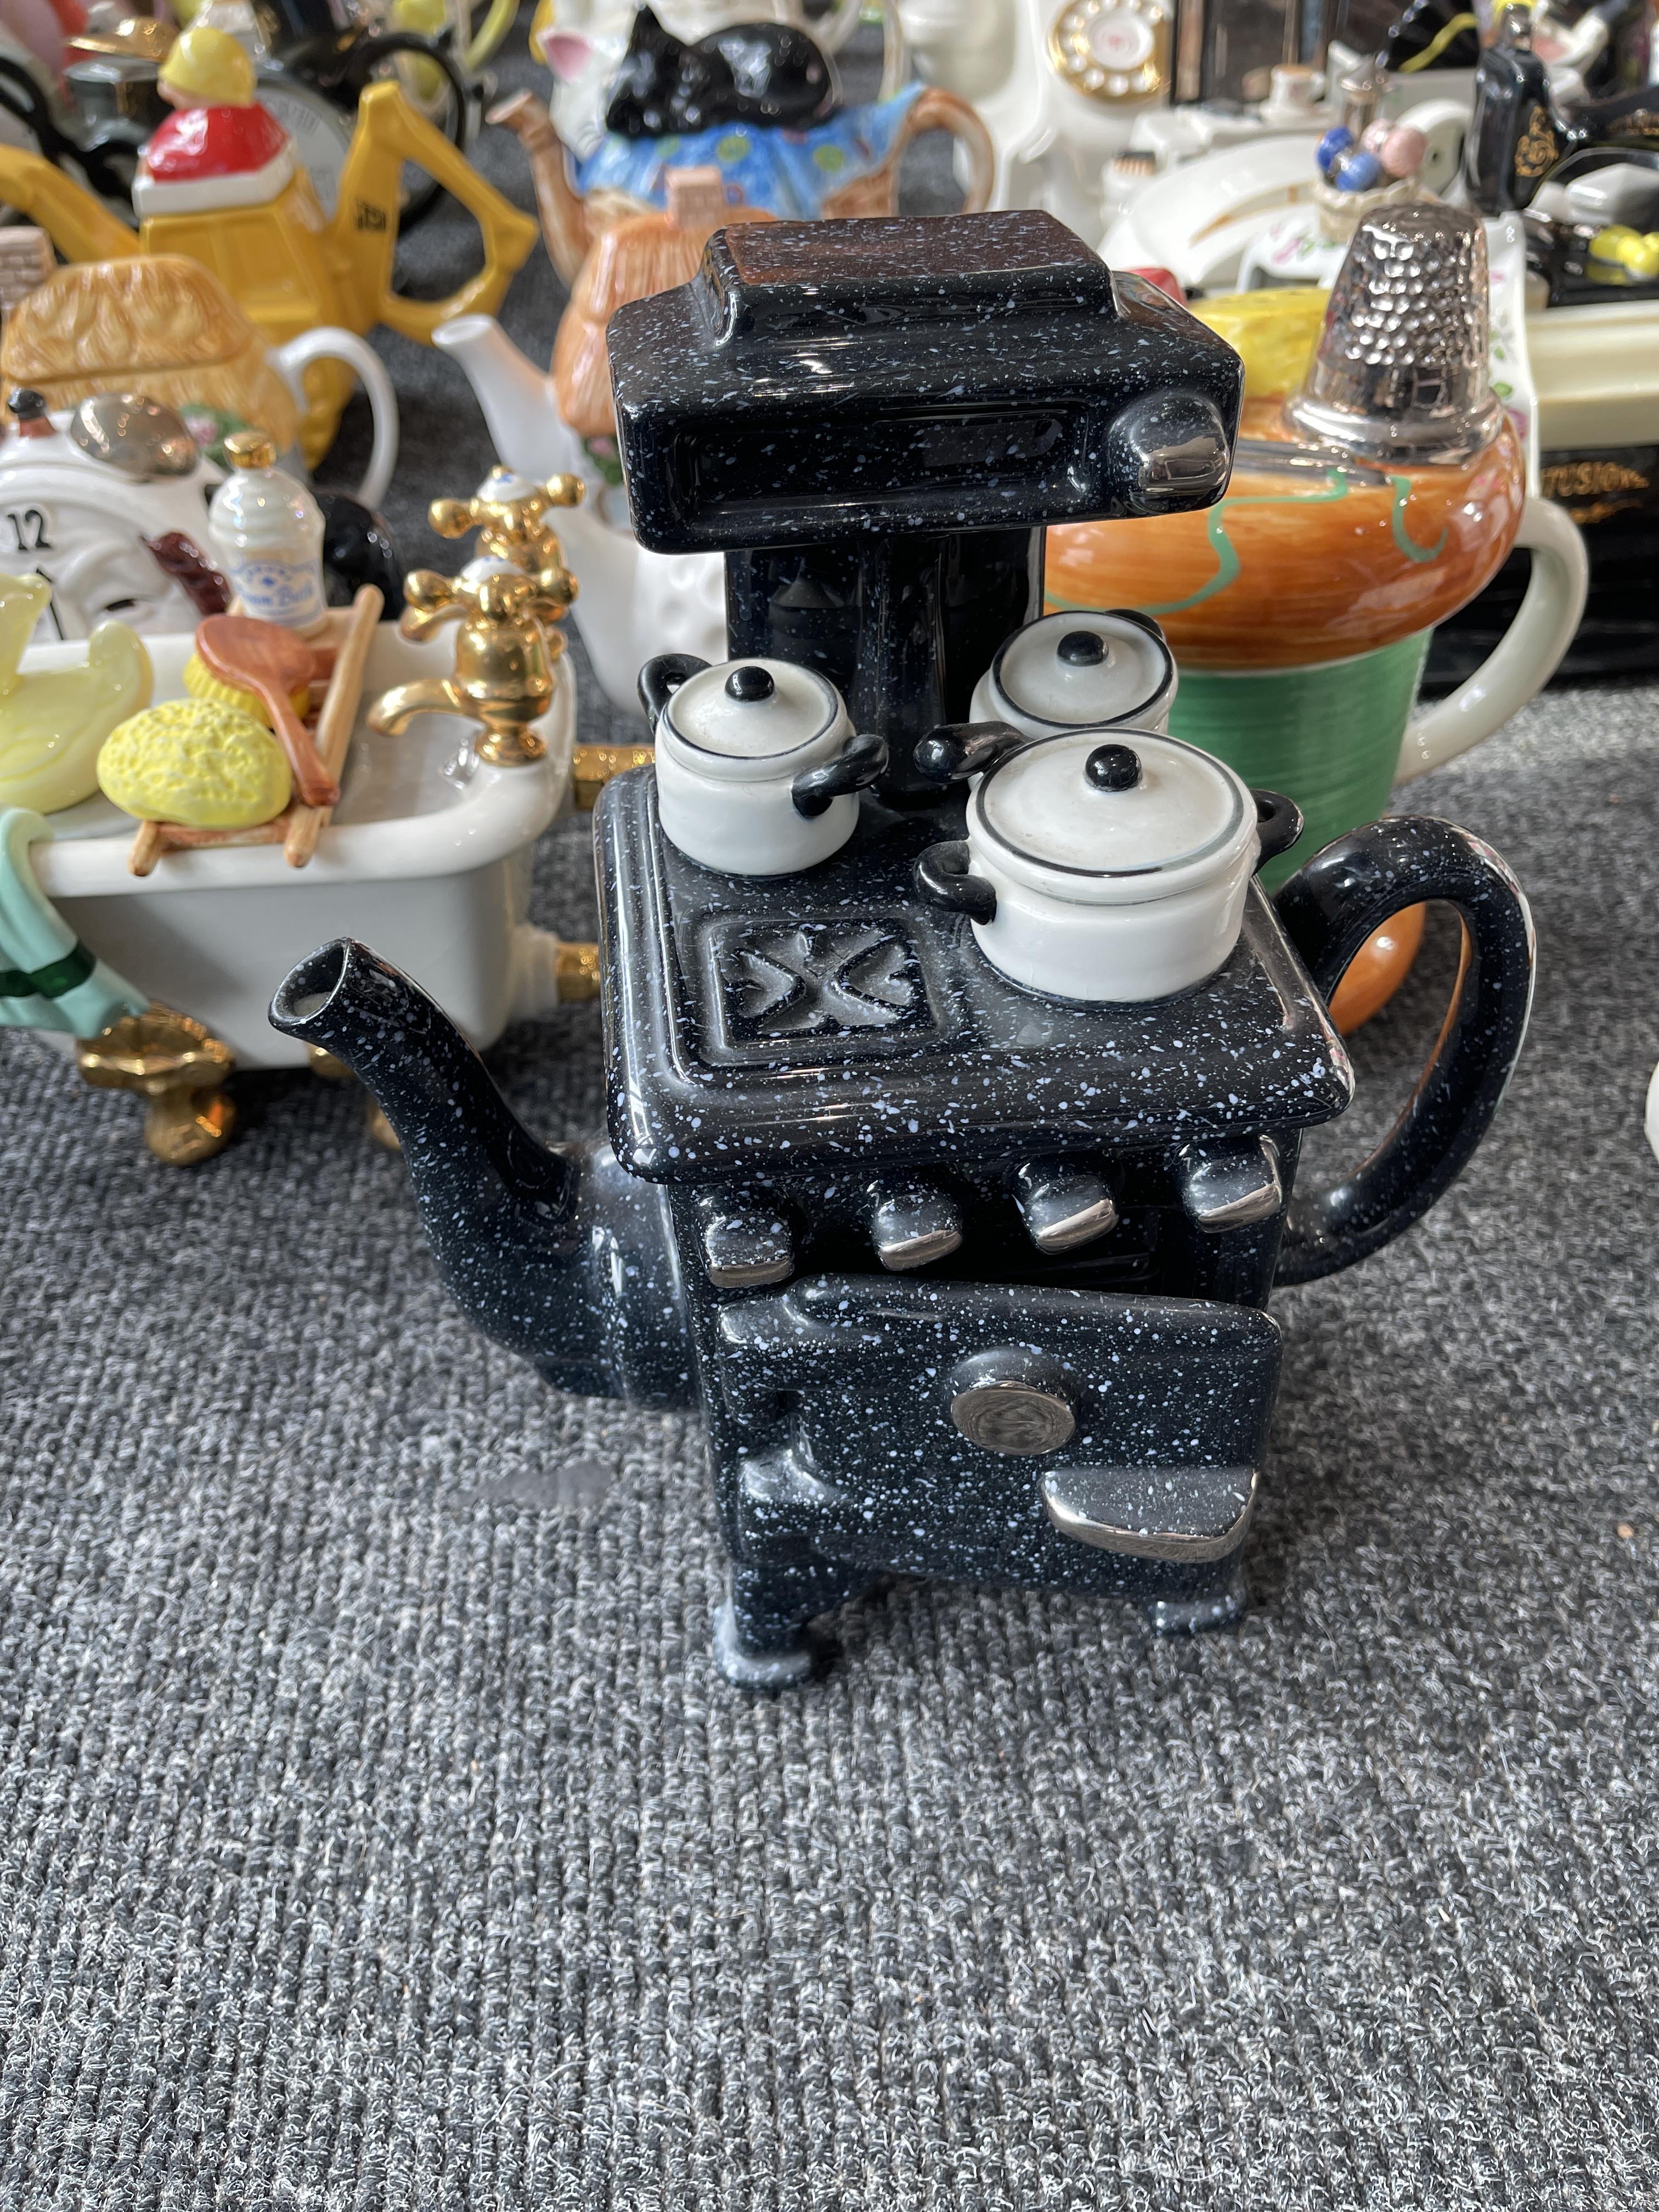 Collection of Ceramic Tea Pots - Image 37 of 44